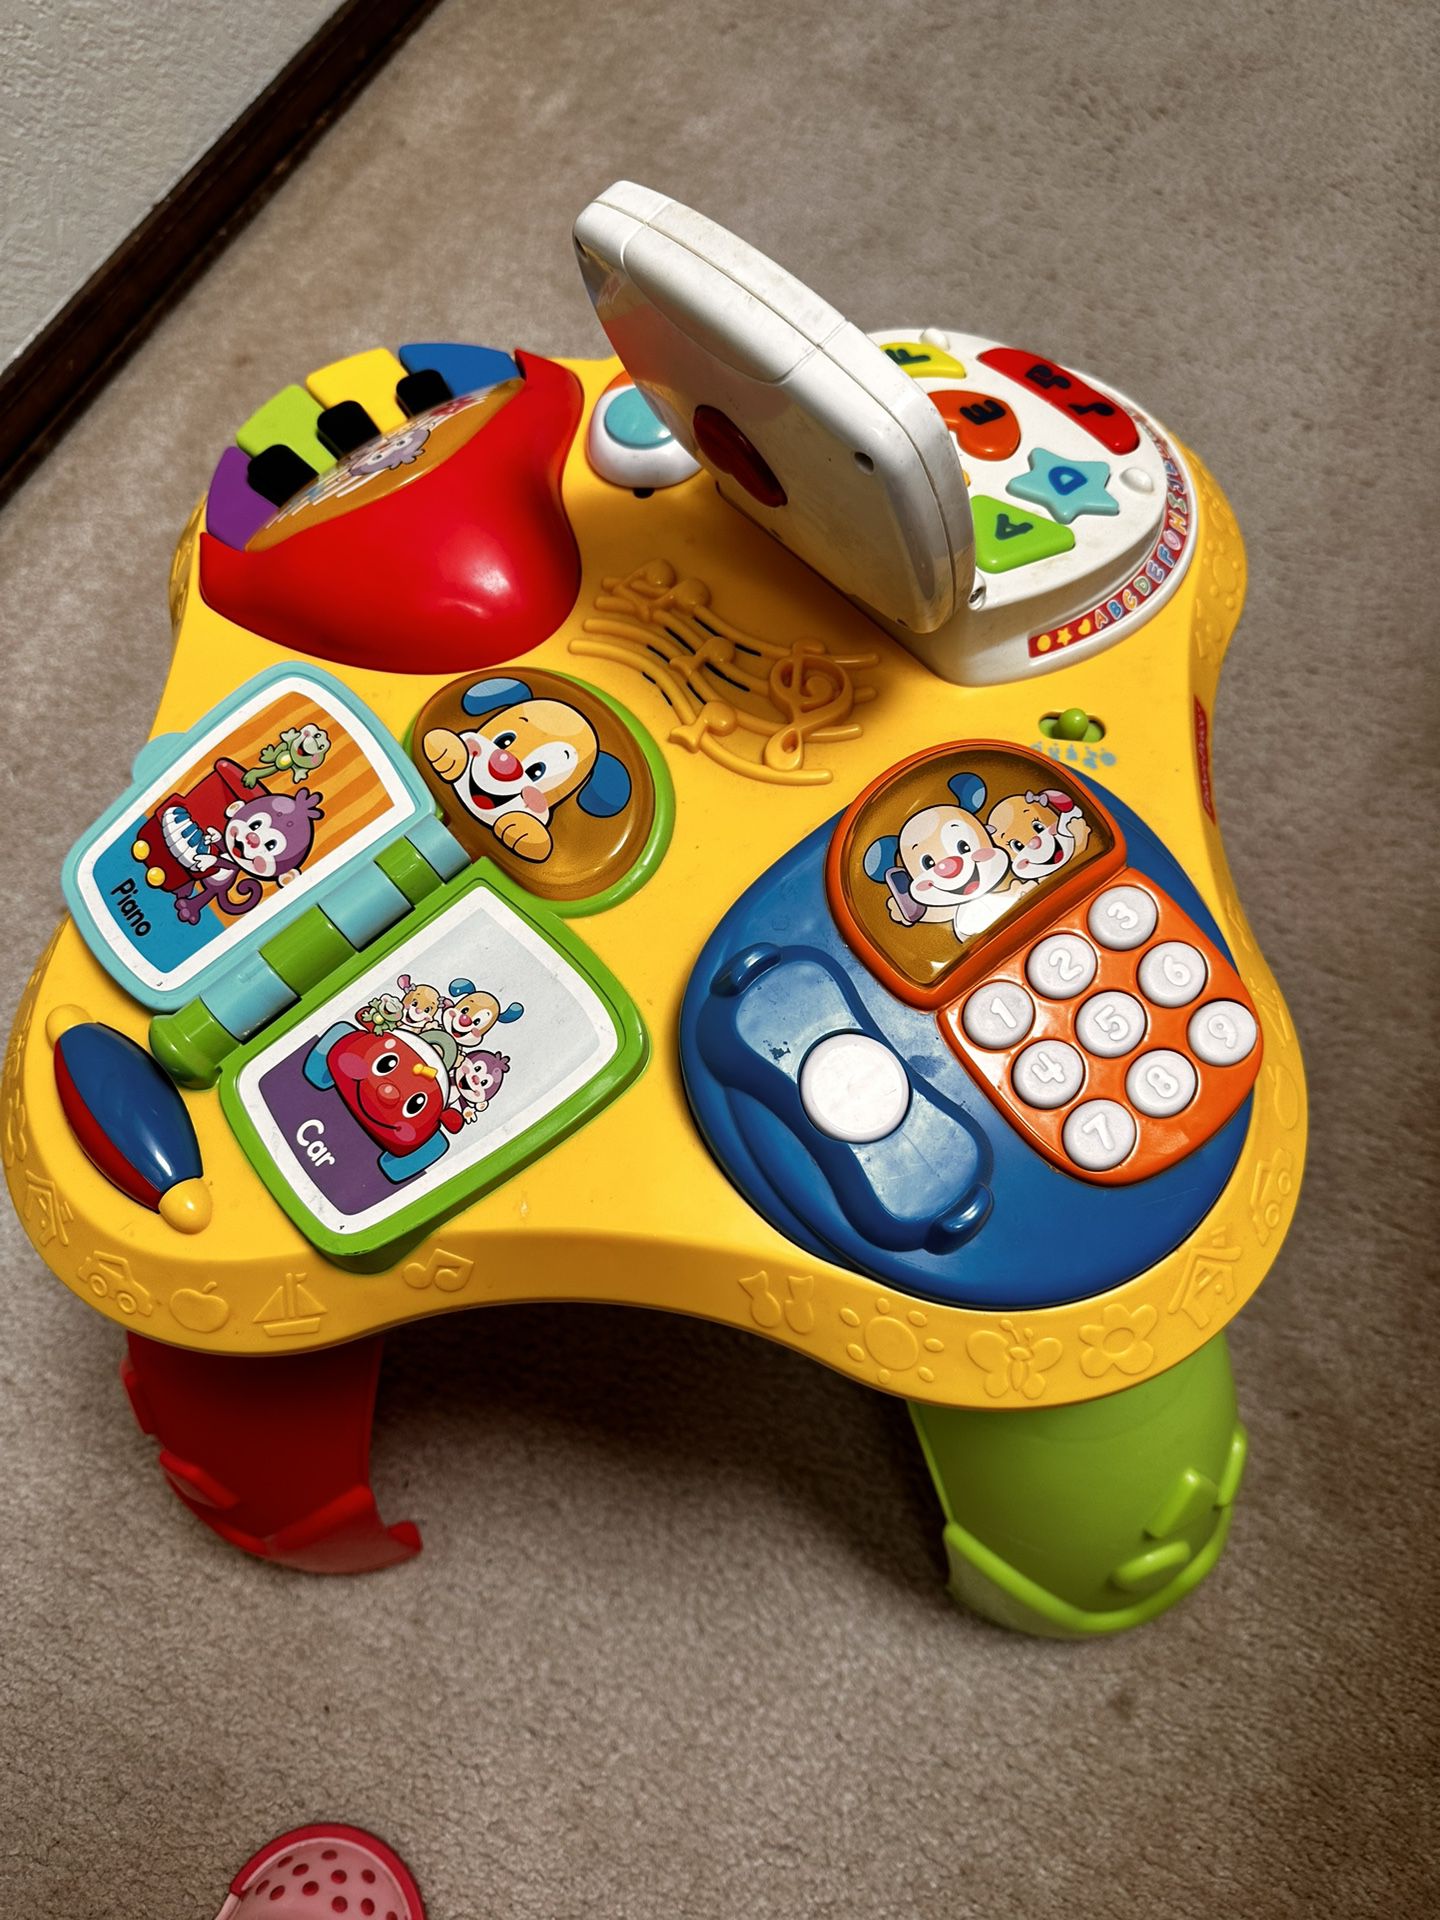 Sound And Activities Toddler Table $15